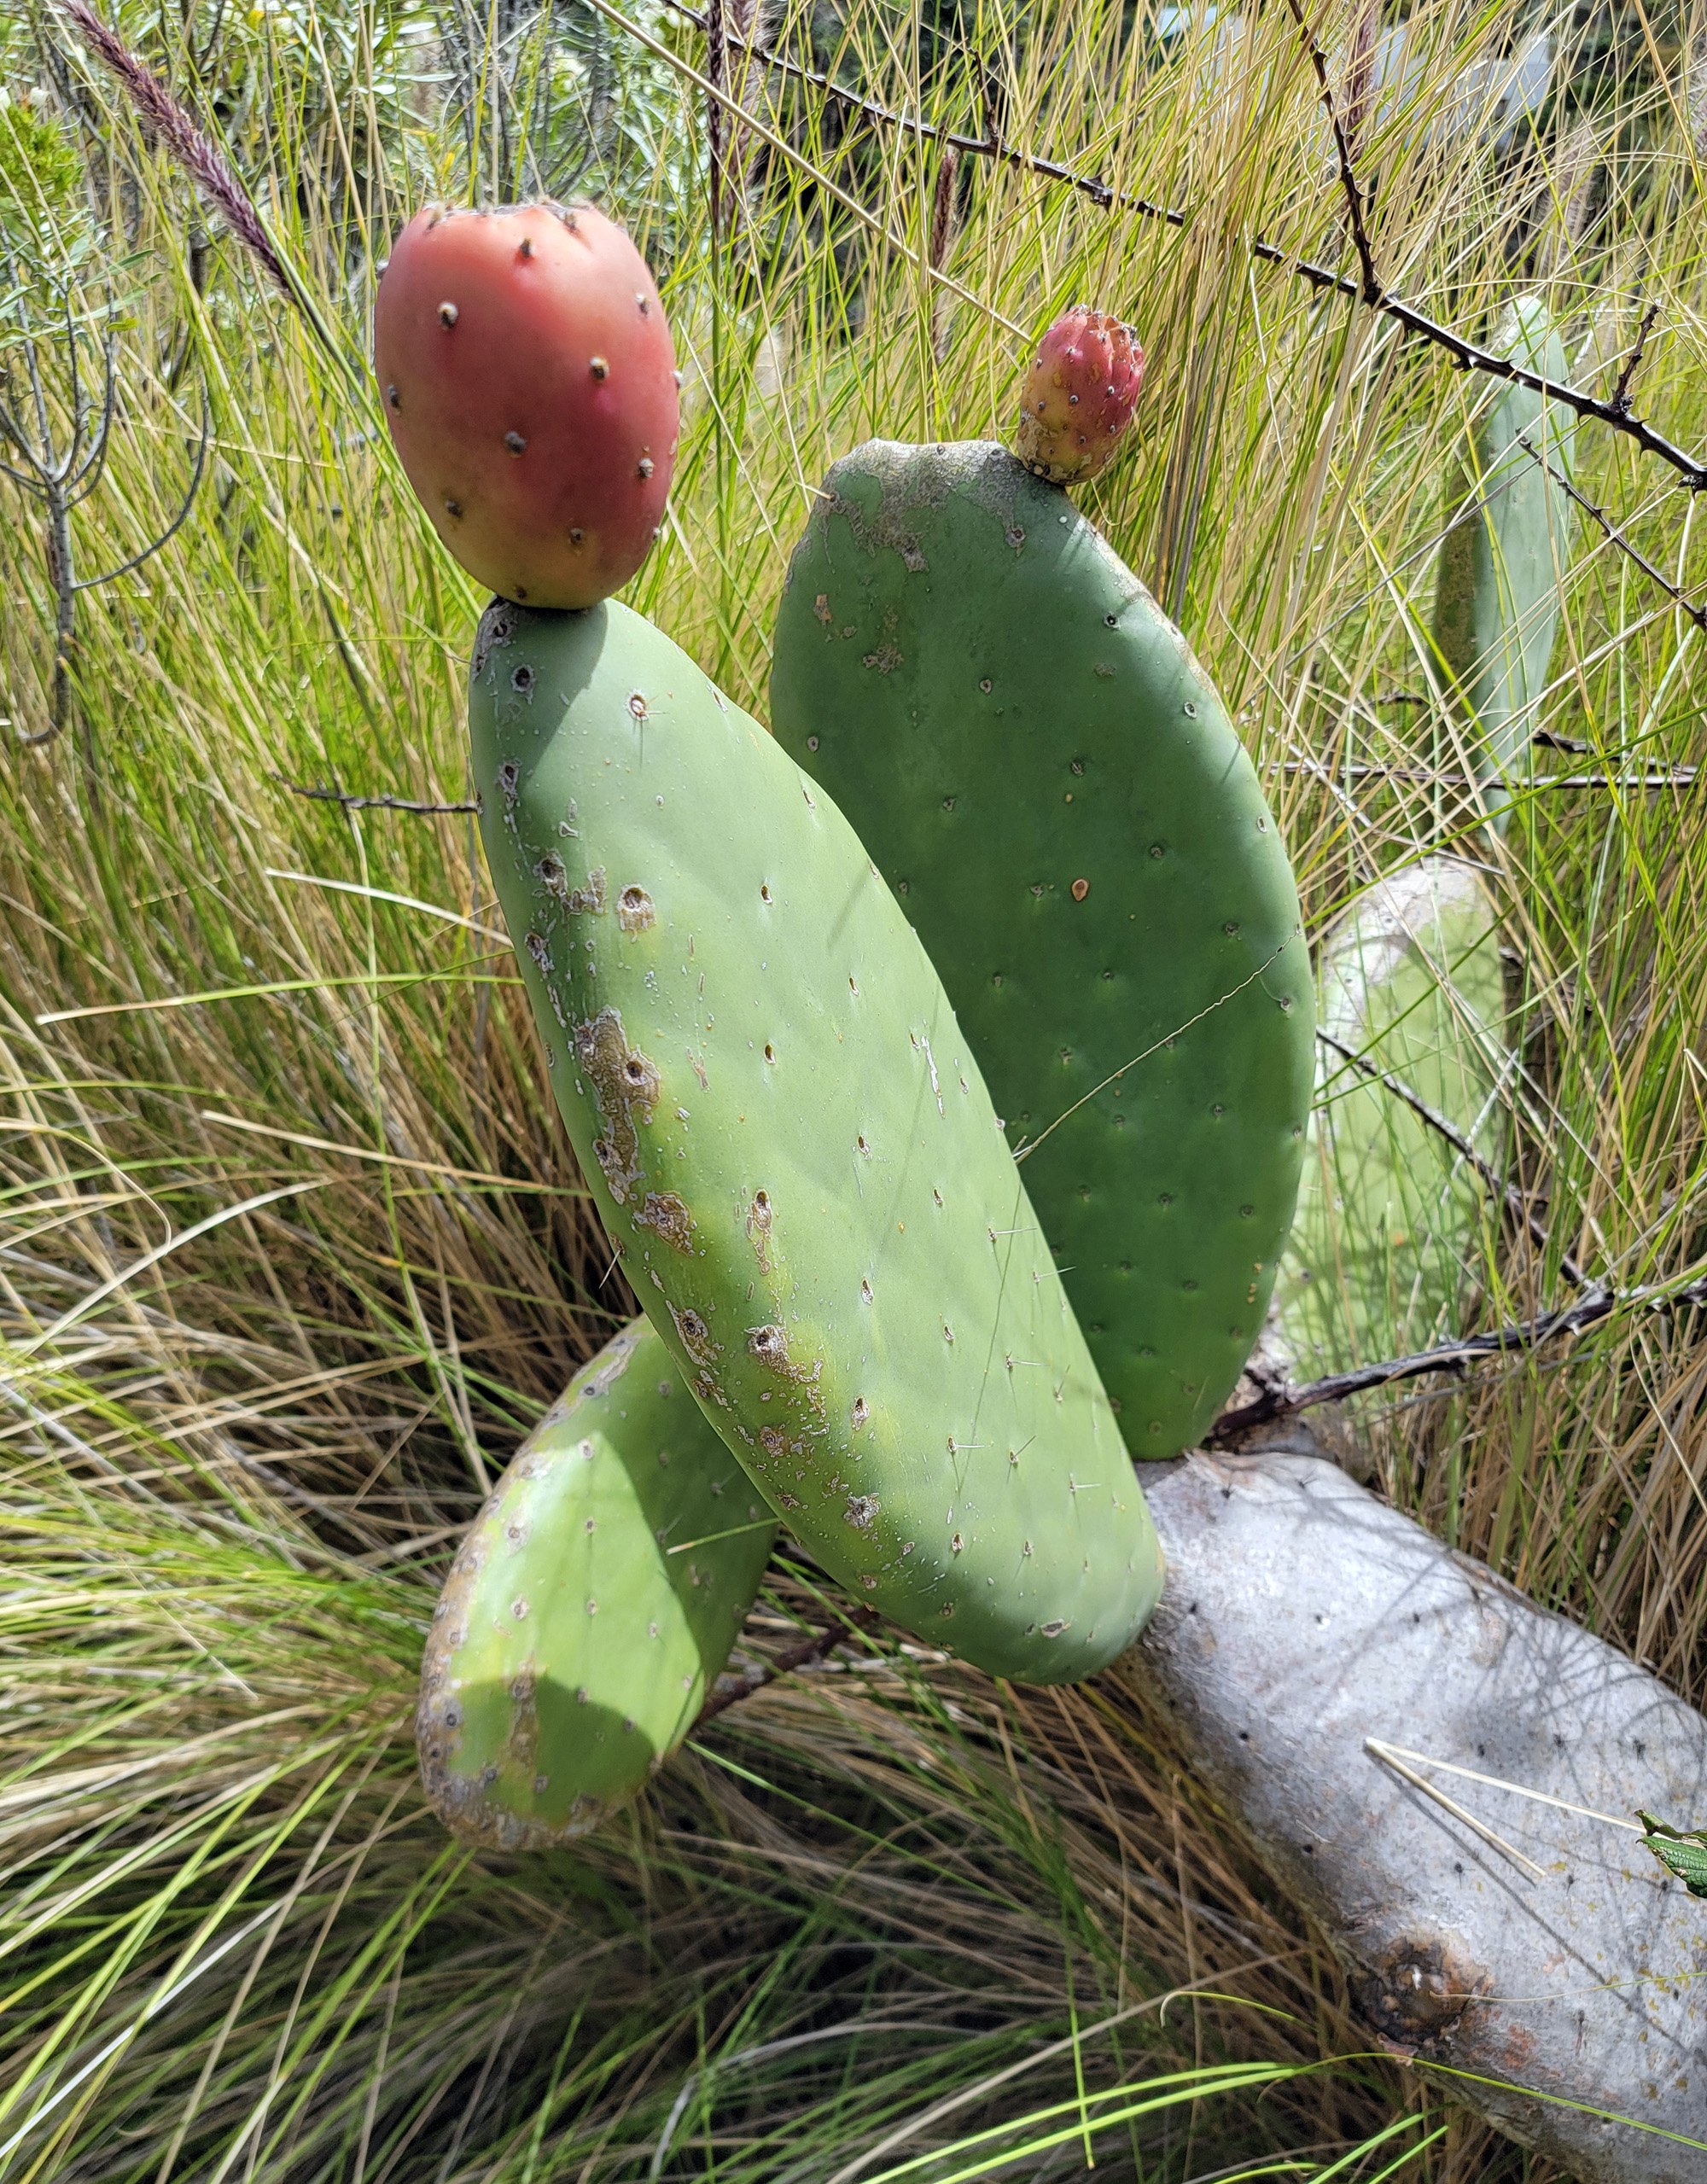 Whole island's cactus population was having a fruit fiesta. Not sure what these do to you if you eat them though. Won't try.